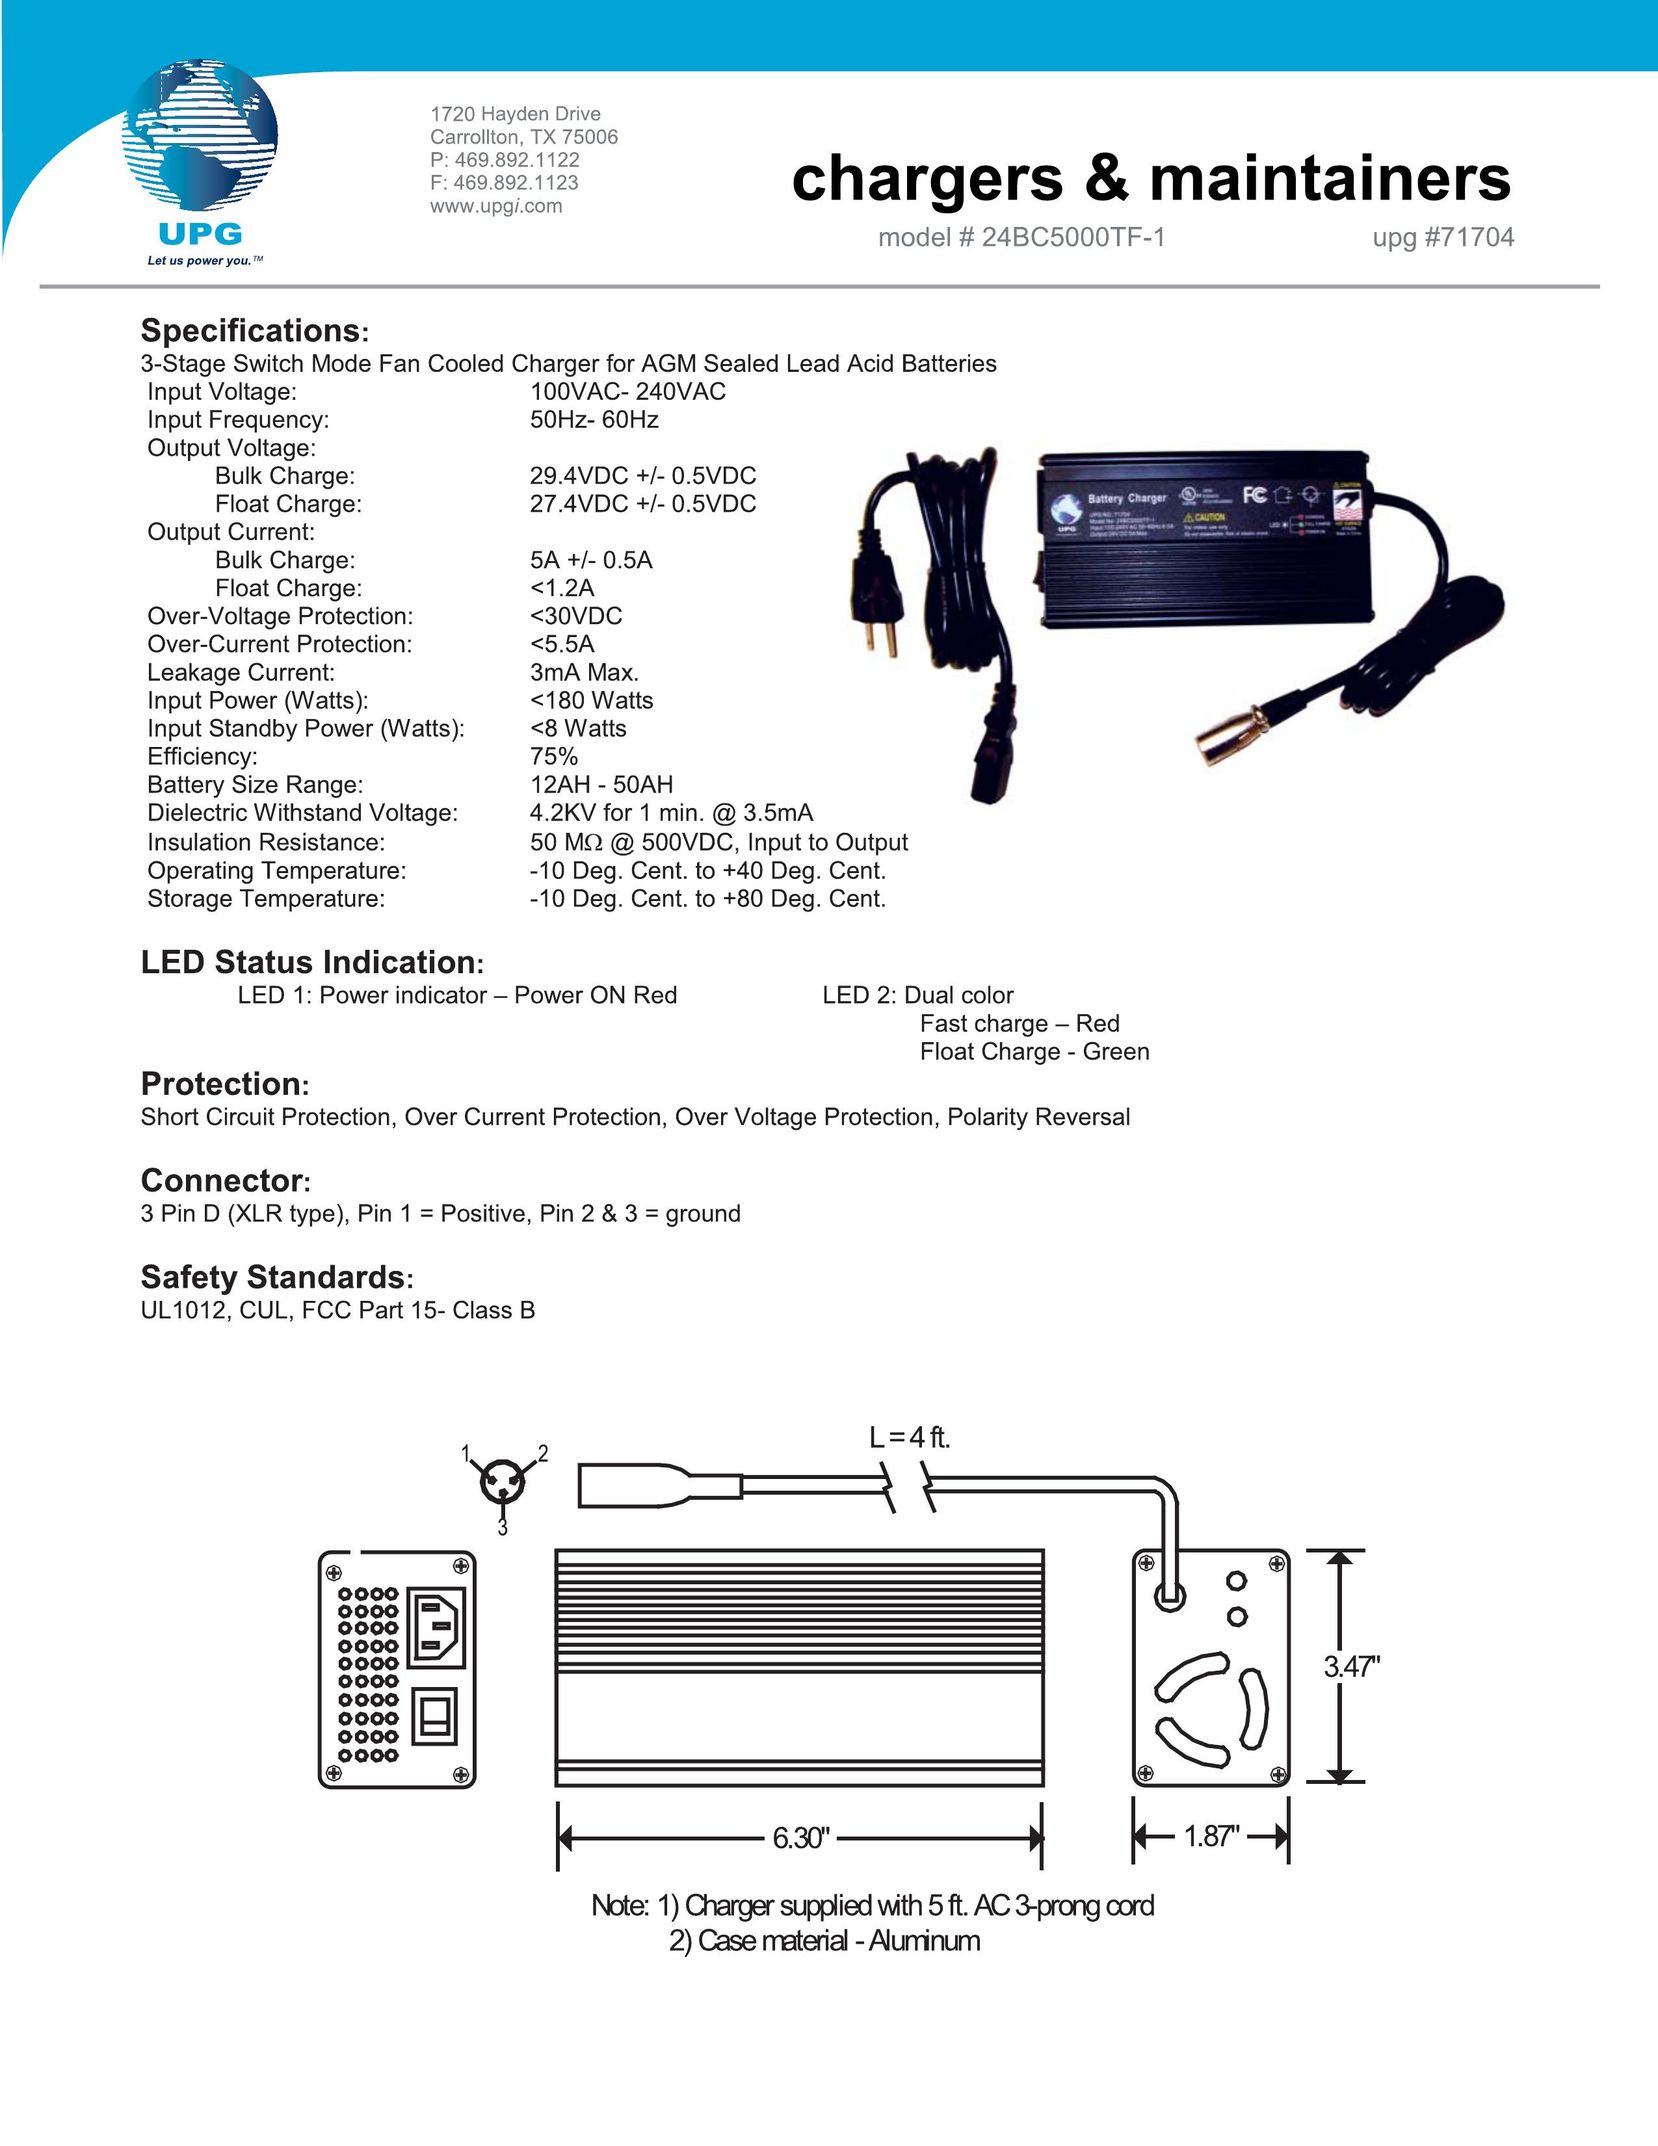 Universal Power Group 24BC5000TF-1 Battery Charger User Manual